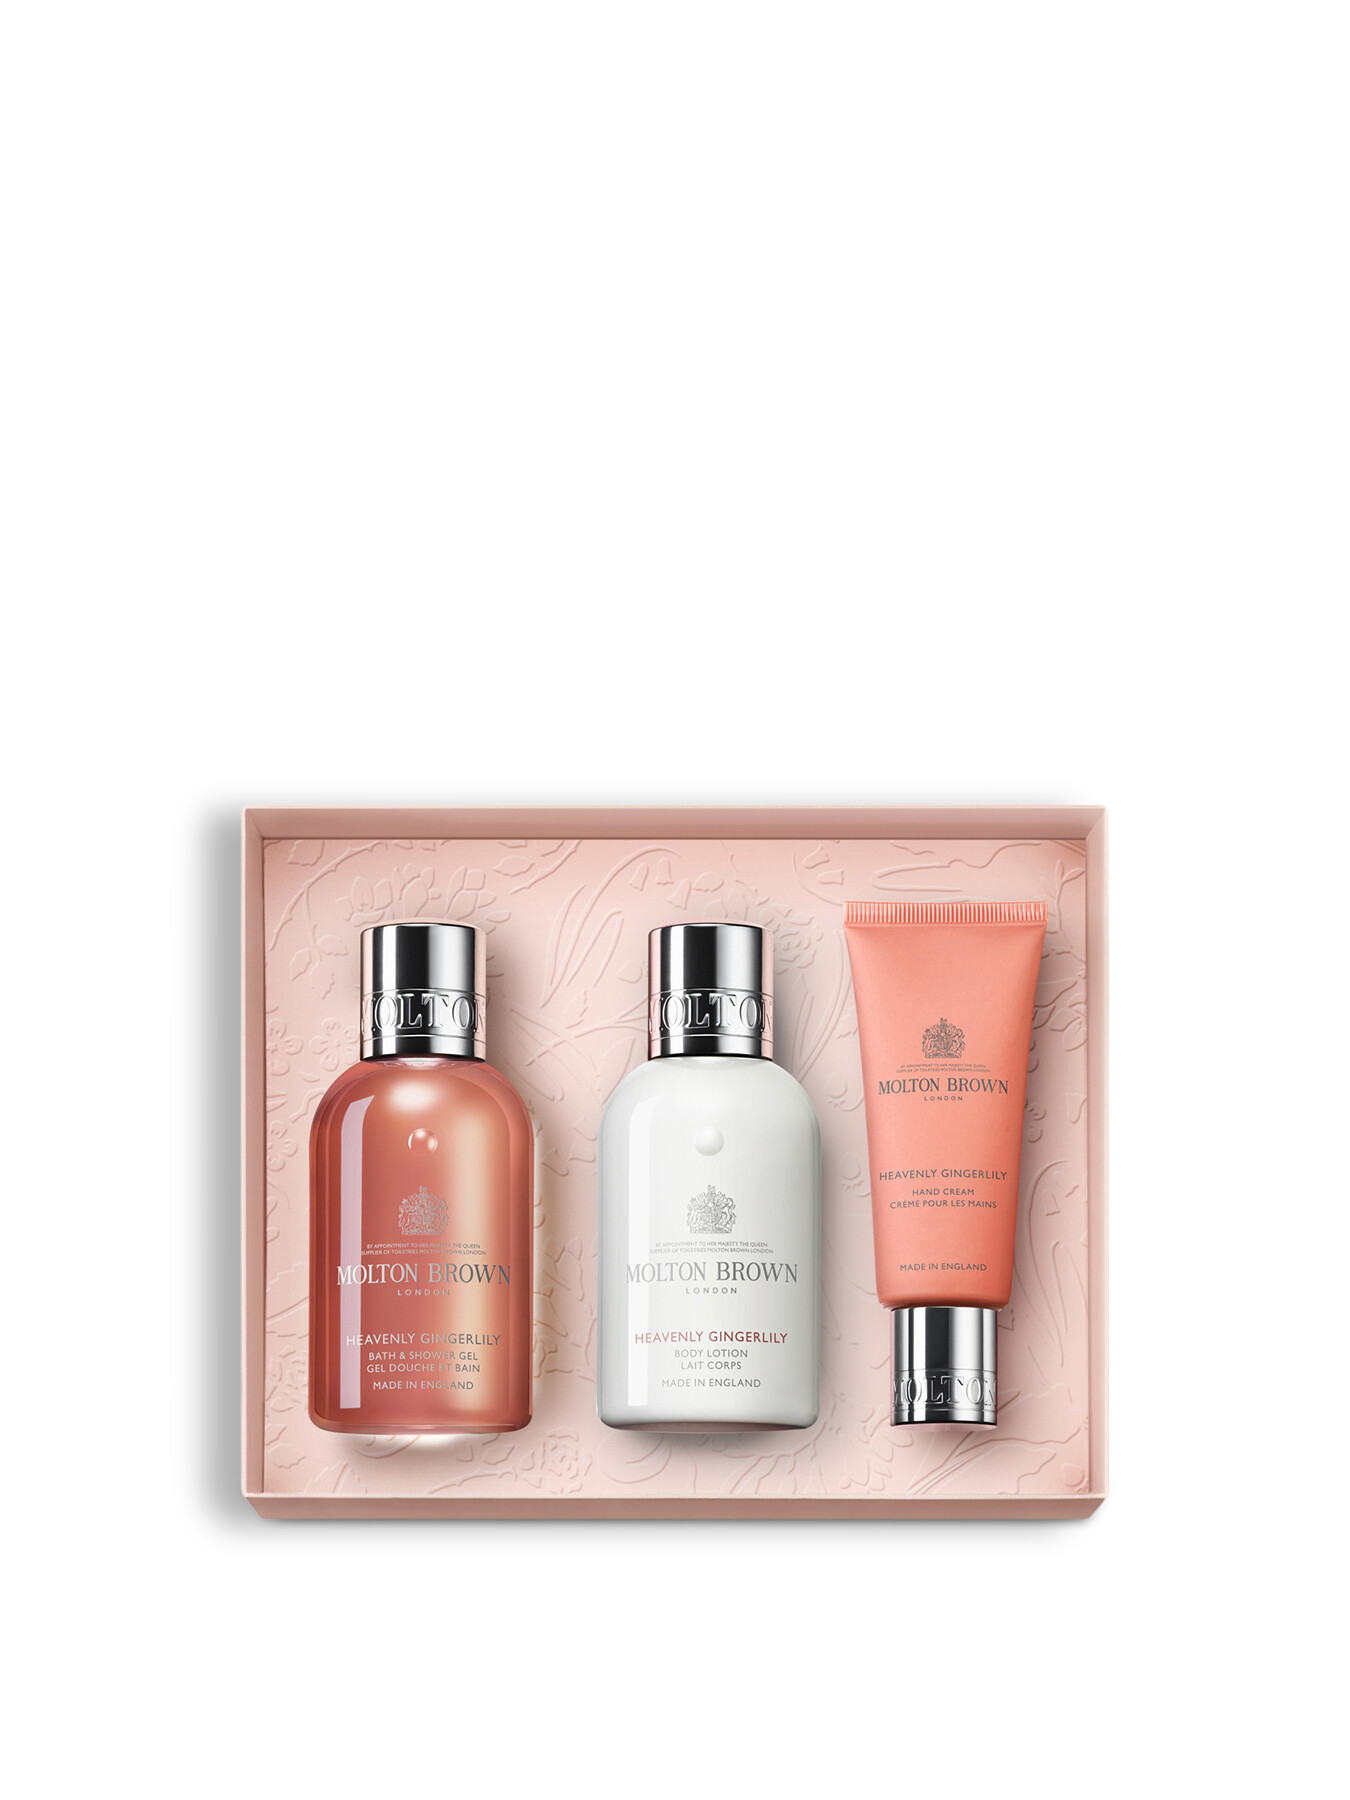 Molton Brown Heavenly Gingerlily Travel Body And Hand Gift Set In White